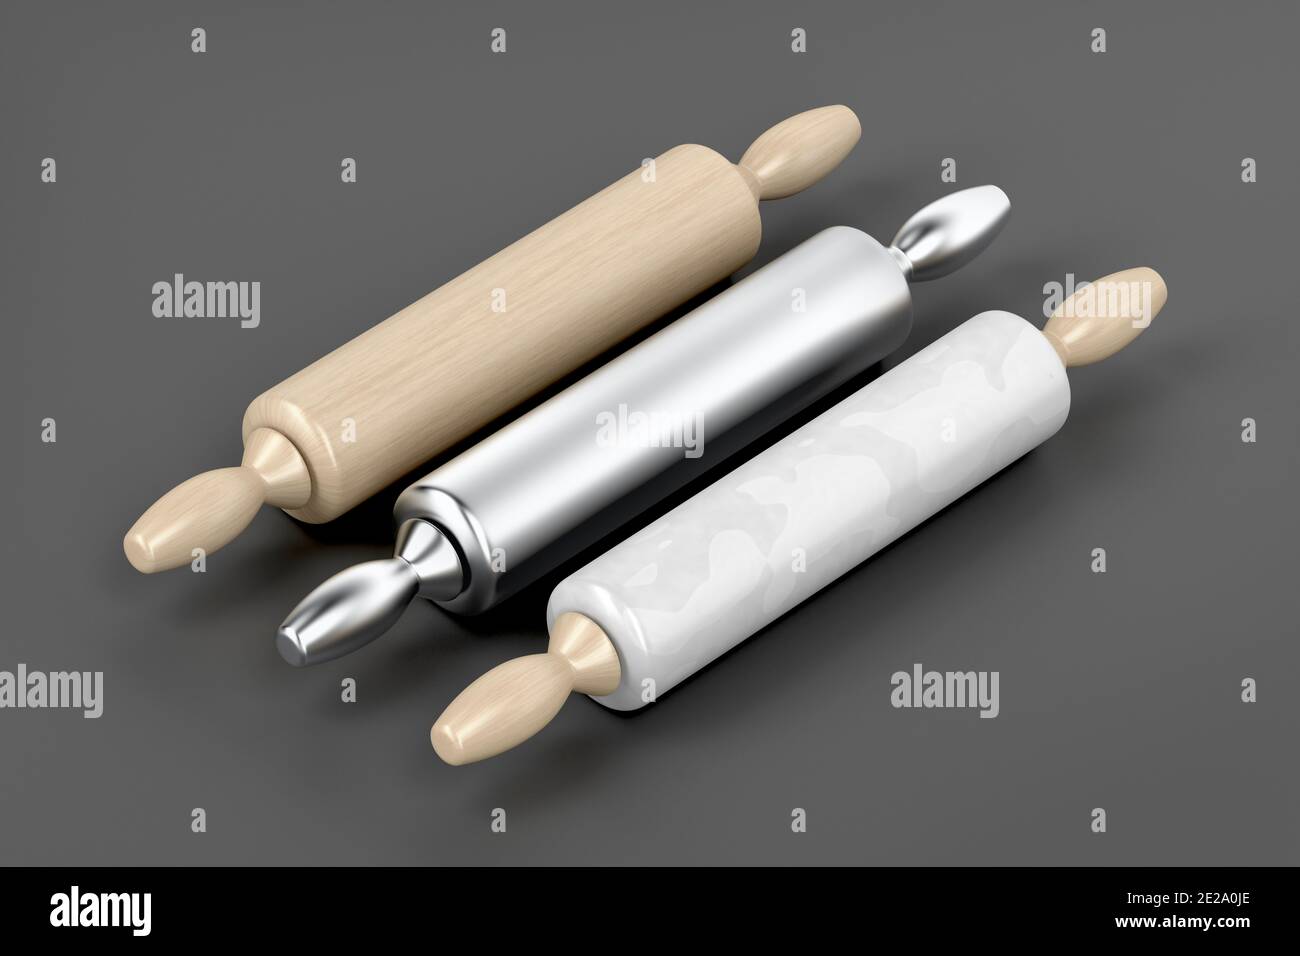 Three rolling pins from different materials on grey background Stock Photo